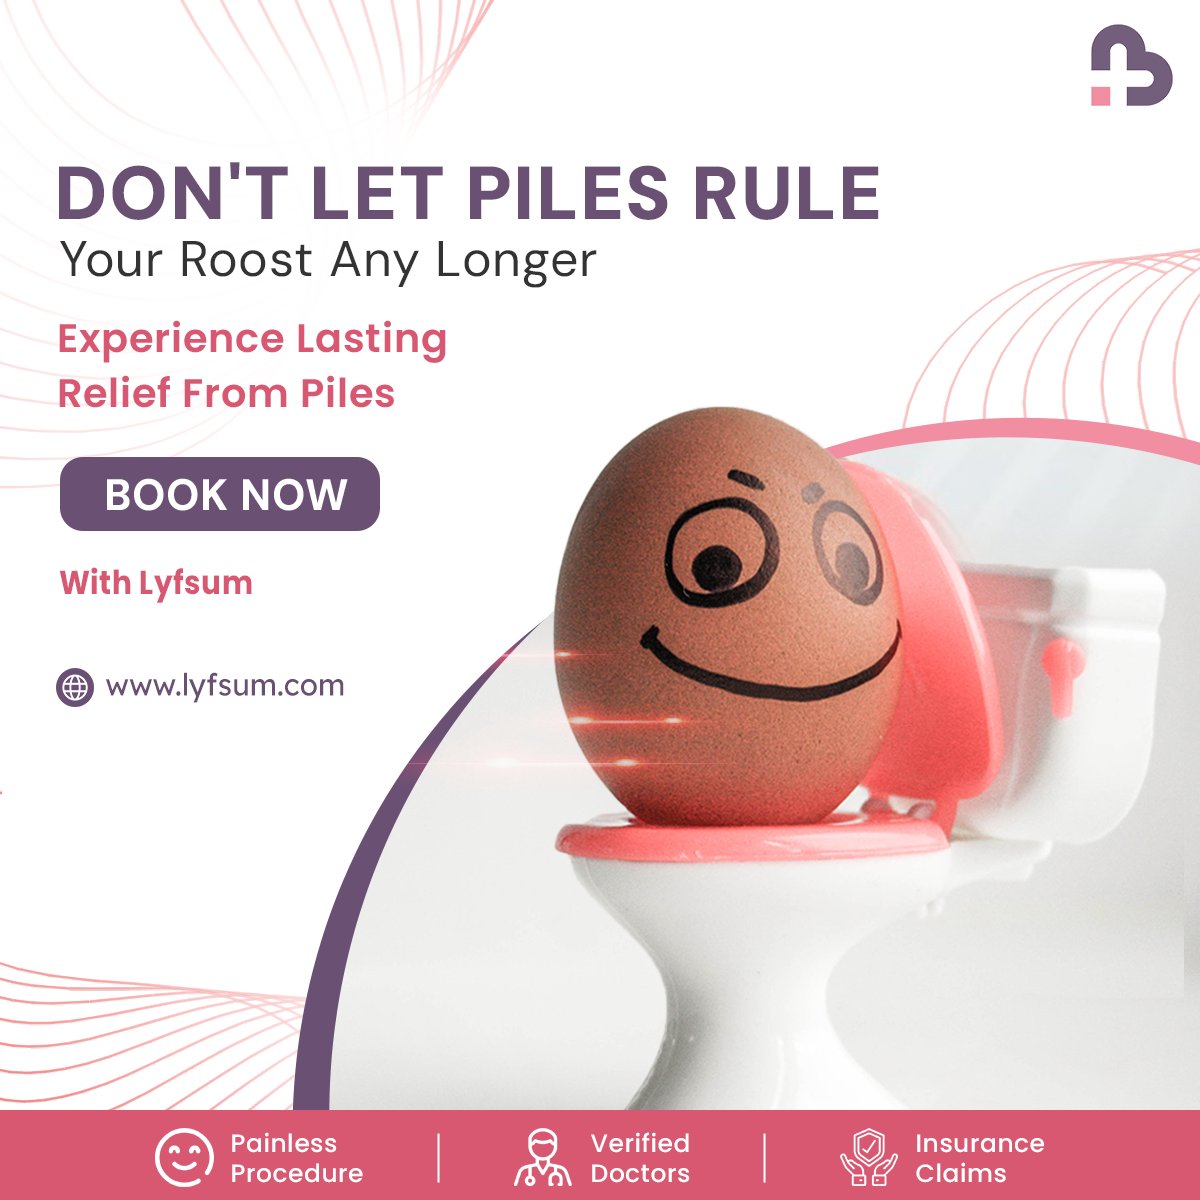 Take back control of your life from the discomfort of piles. Discover long-lasting relief with Lyfsum.

Schedule your appointment now.
Click on the link: lyfsum.com

#lyfsum #LyfsumCare #HealthForAll #indiandoctors #PILES #pilesrelief #PilesSurgery #pilestreatment